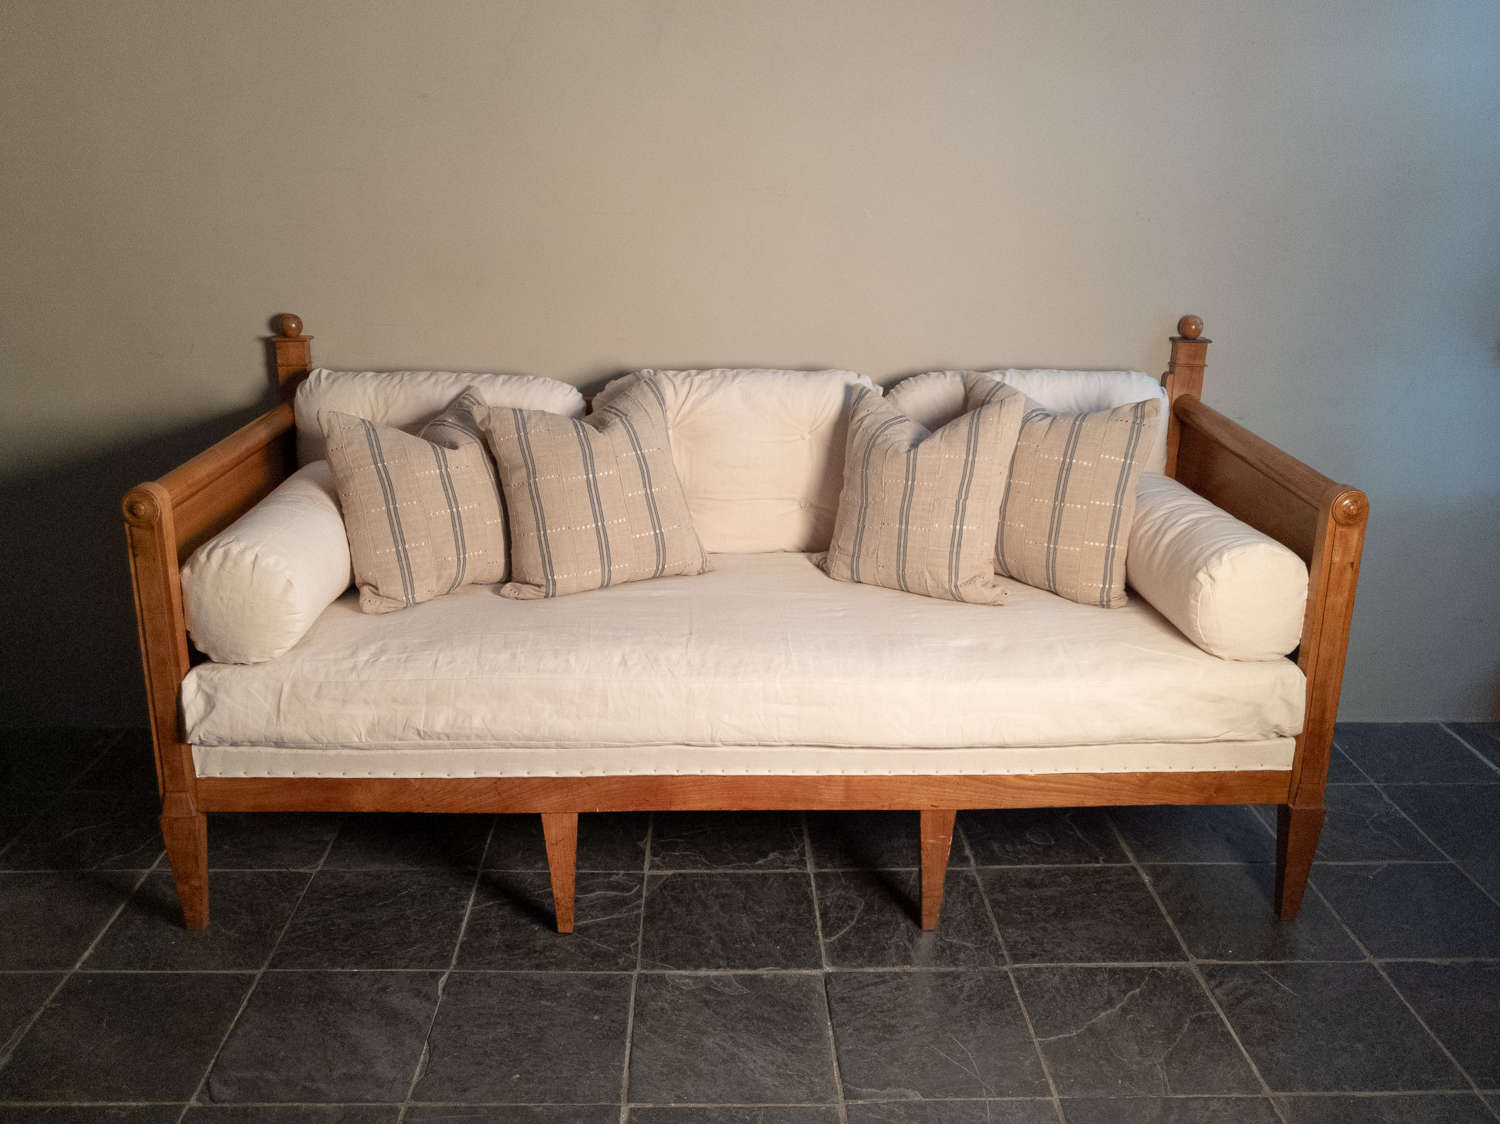 An Early 19th Century French Fruitwood Daybed Sofa